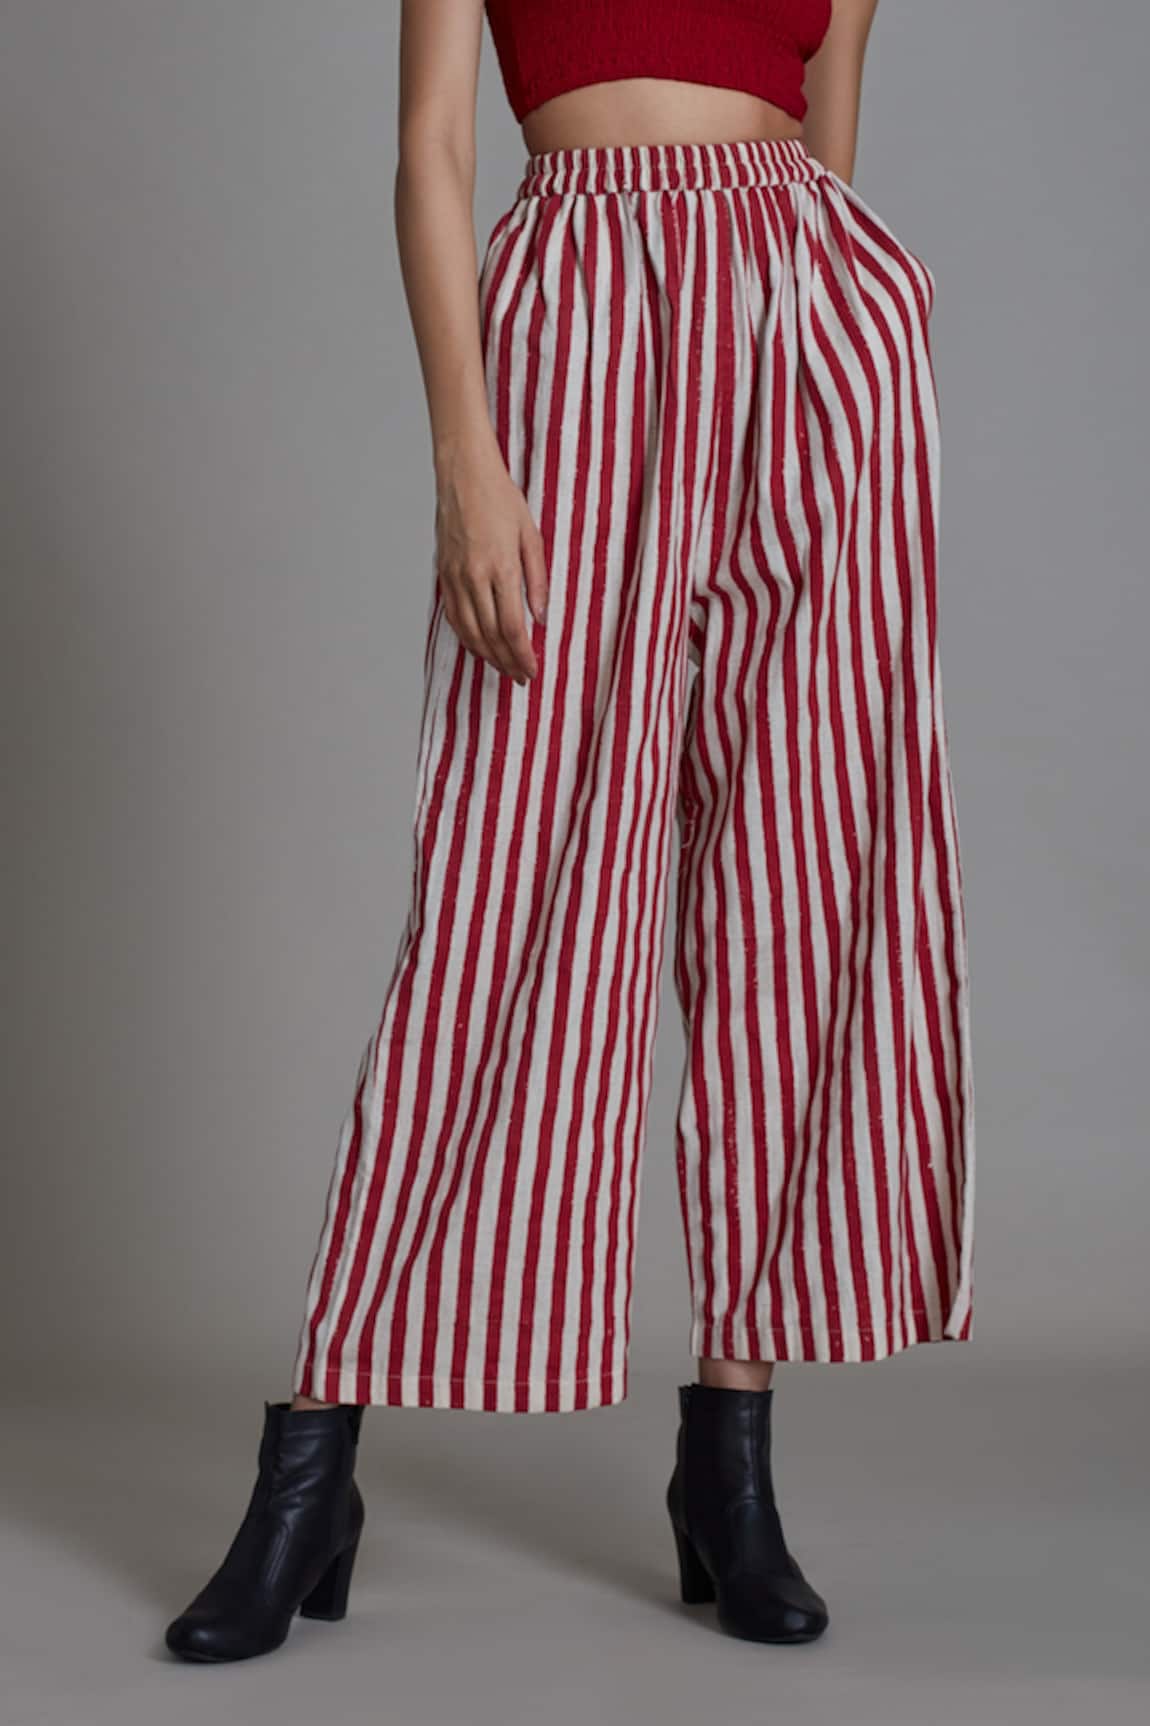 OffWhite Striped PajamaStyle Pants 930  Camila Cabellos Striped Pants  Have a Romantic Detail She Doesnt Want You to Miss  POPSUGAR Latina Photo  6